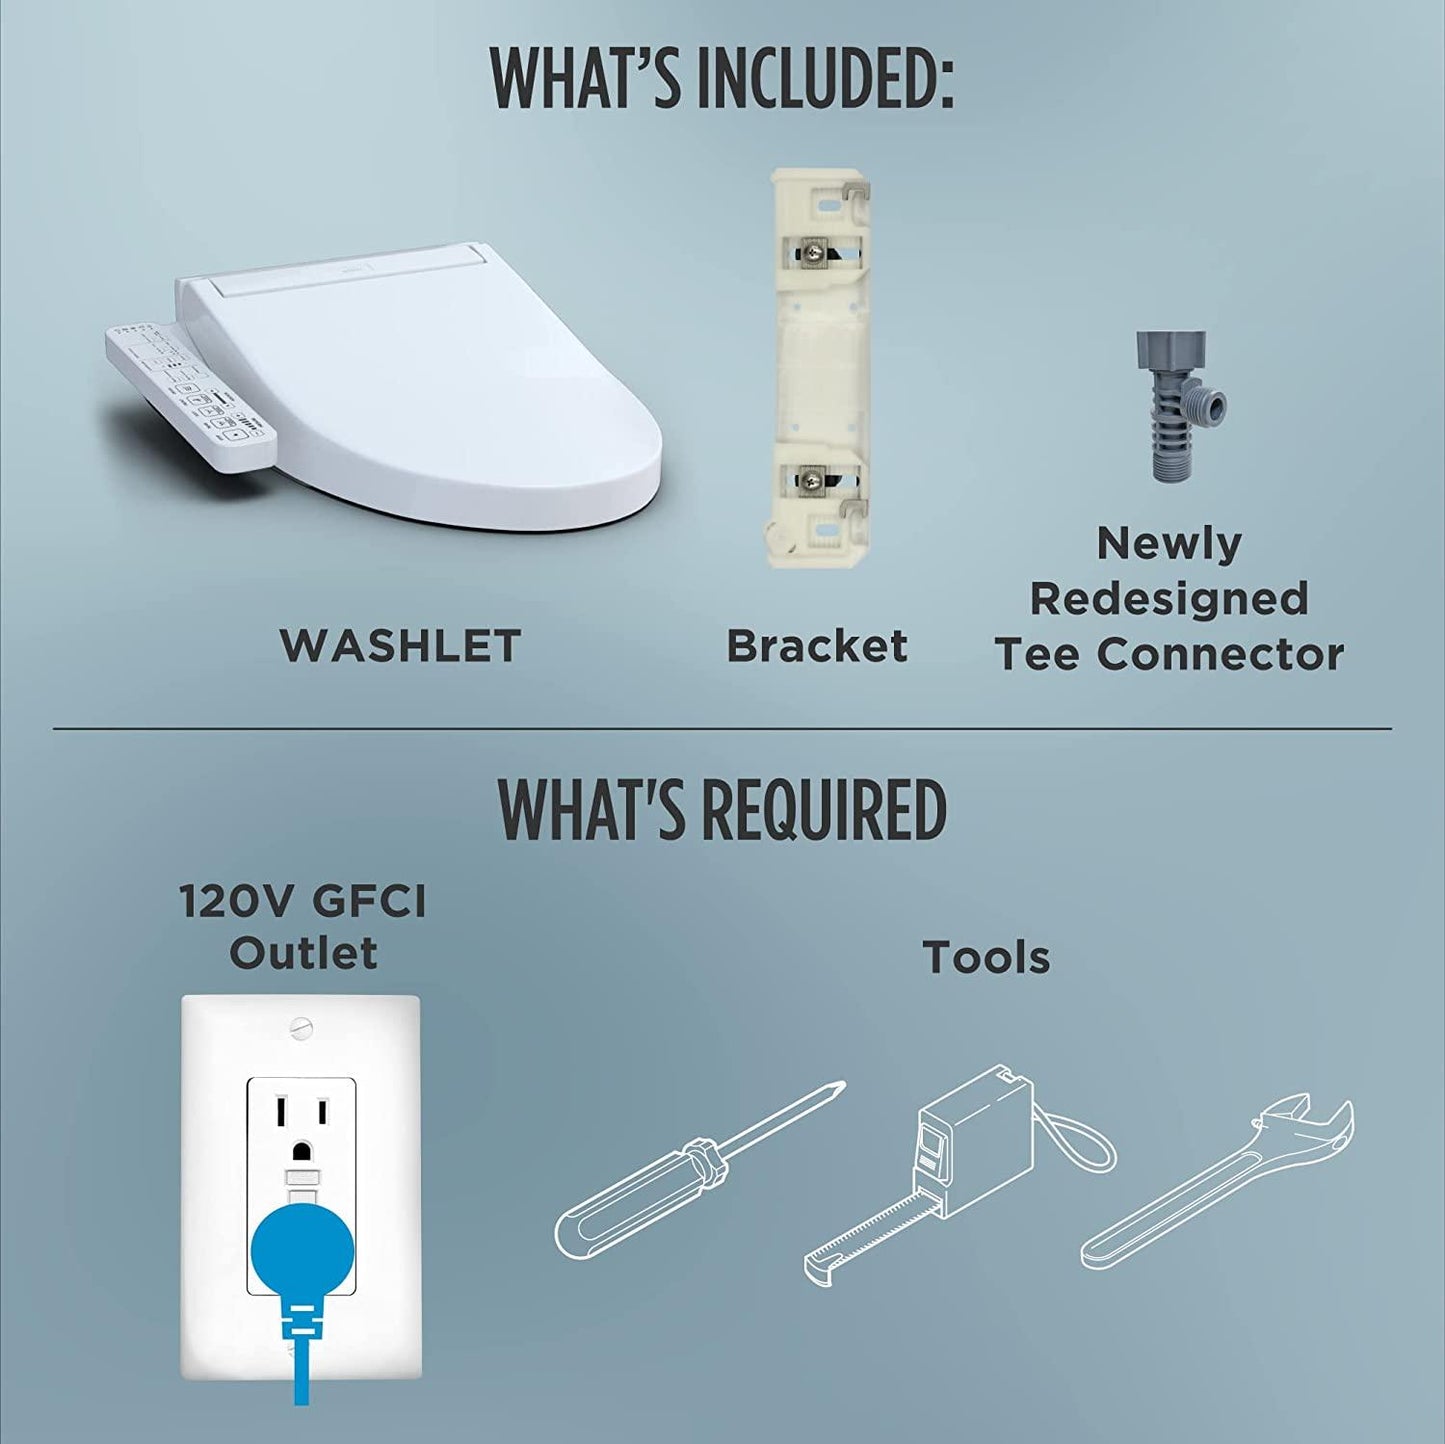 TOTO WASHLET A2,Electronic Toilet Seat with Heated Seat and SoftClose Lid, Elongated, Cotton White - YOURISHOP.COM